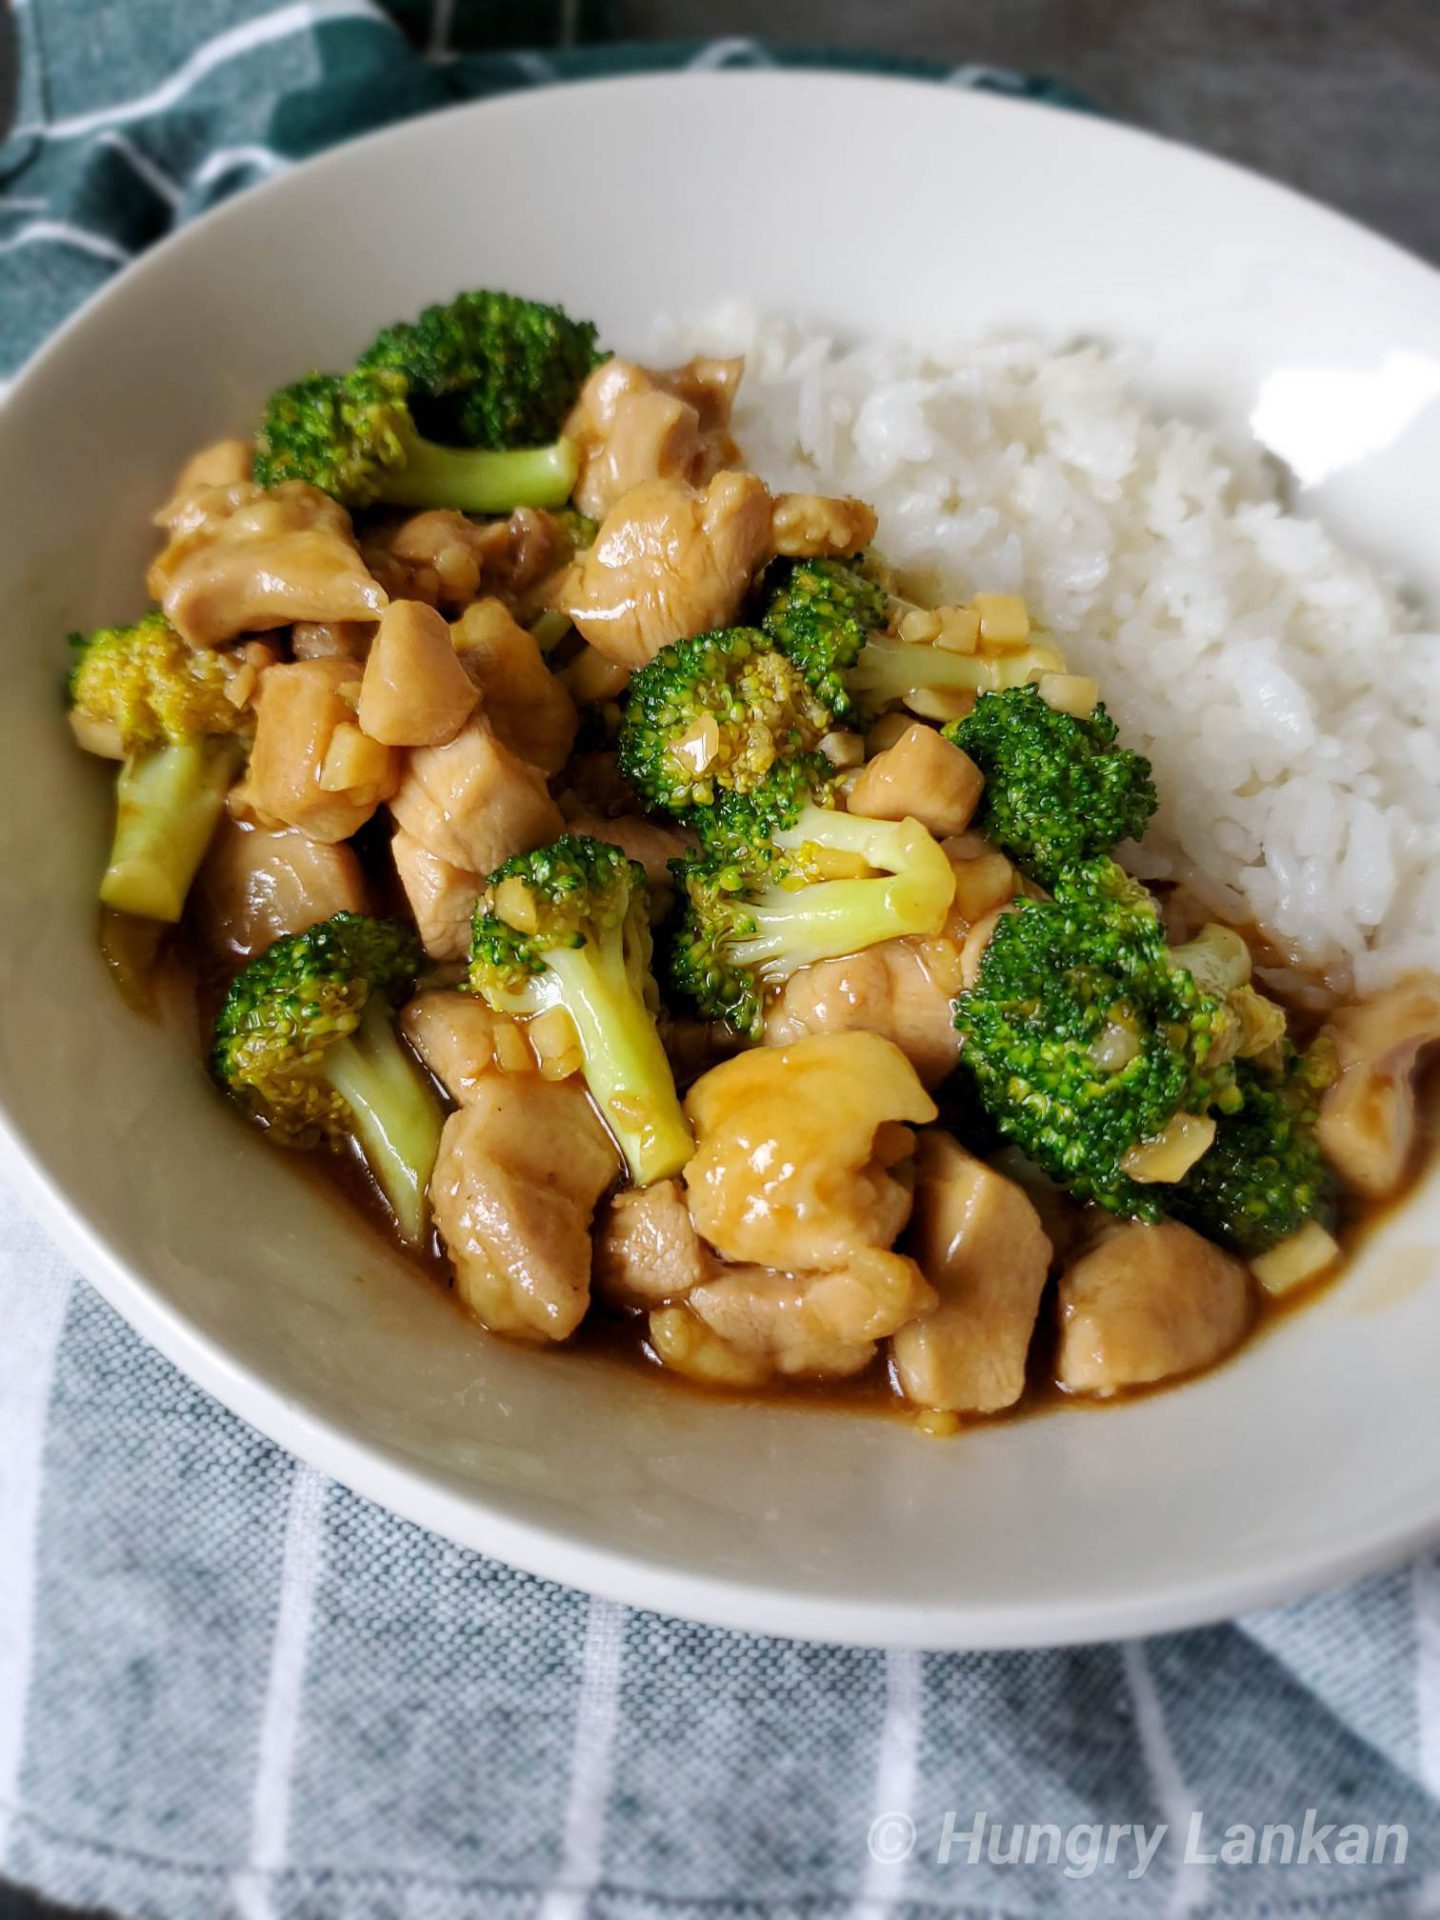 Chinese chicken and broccoli in brown sauce - Hungry Lankan